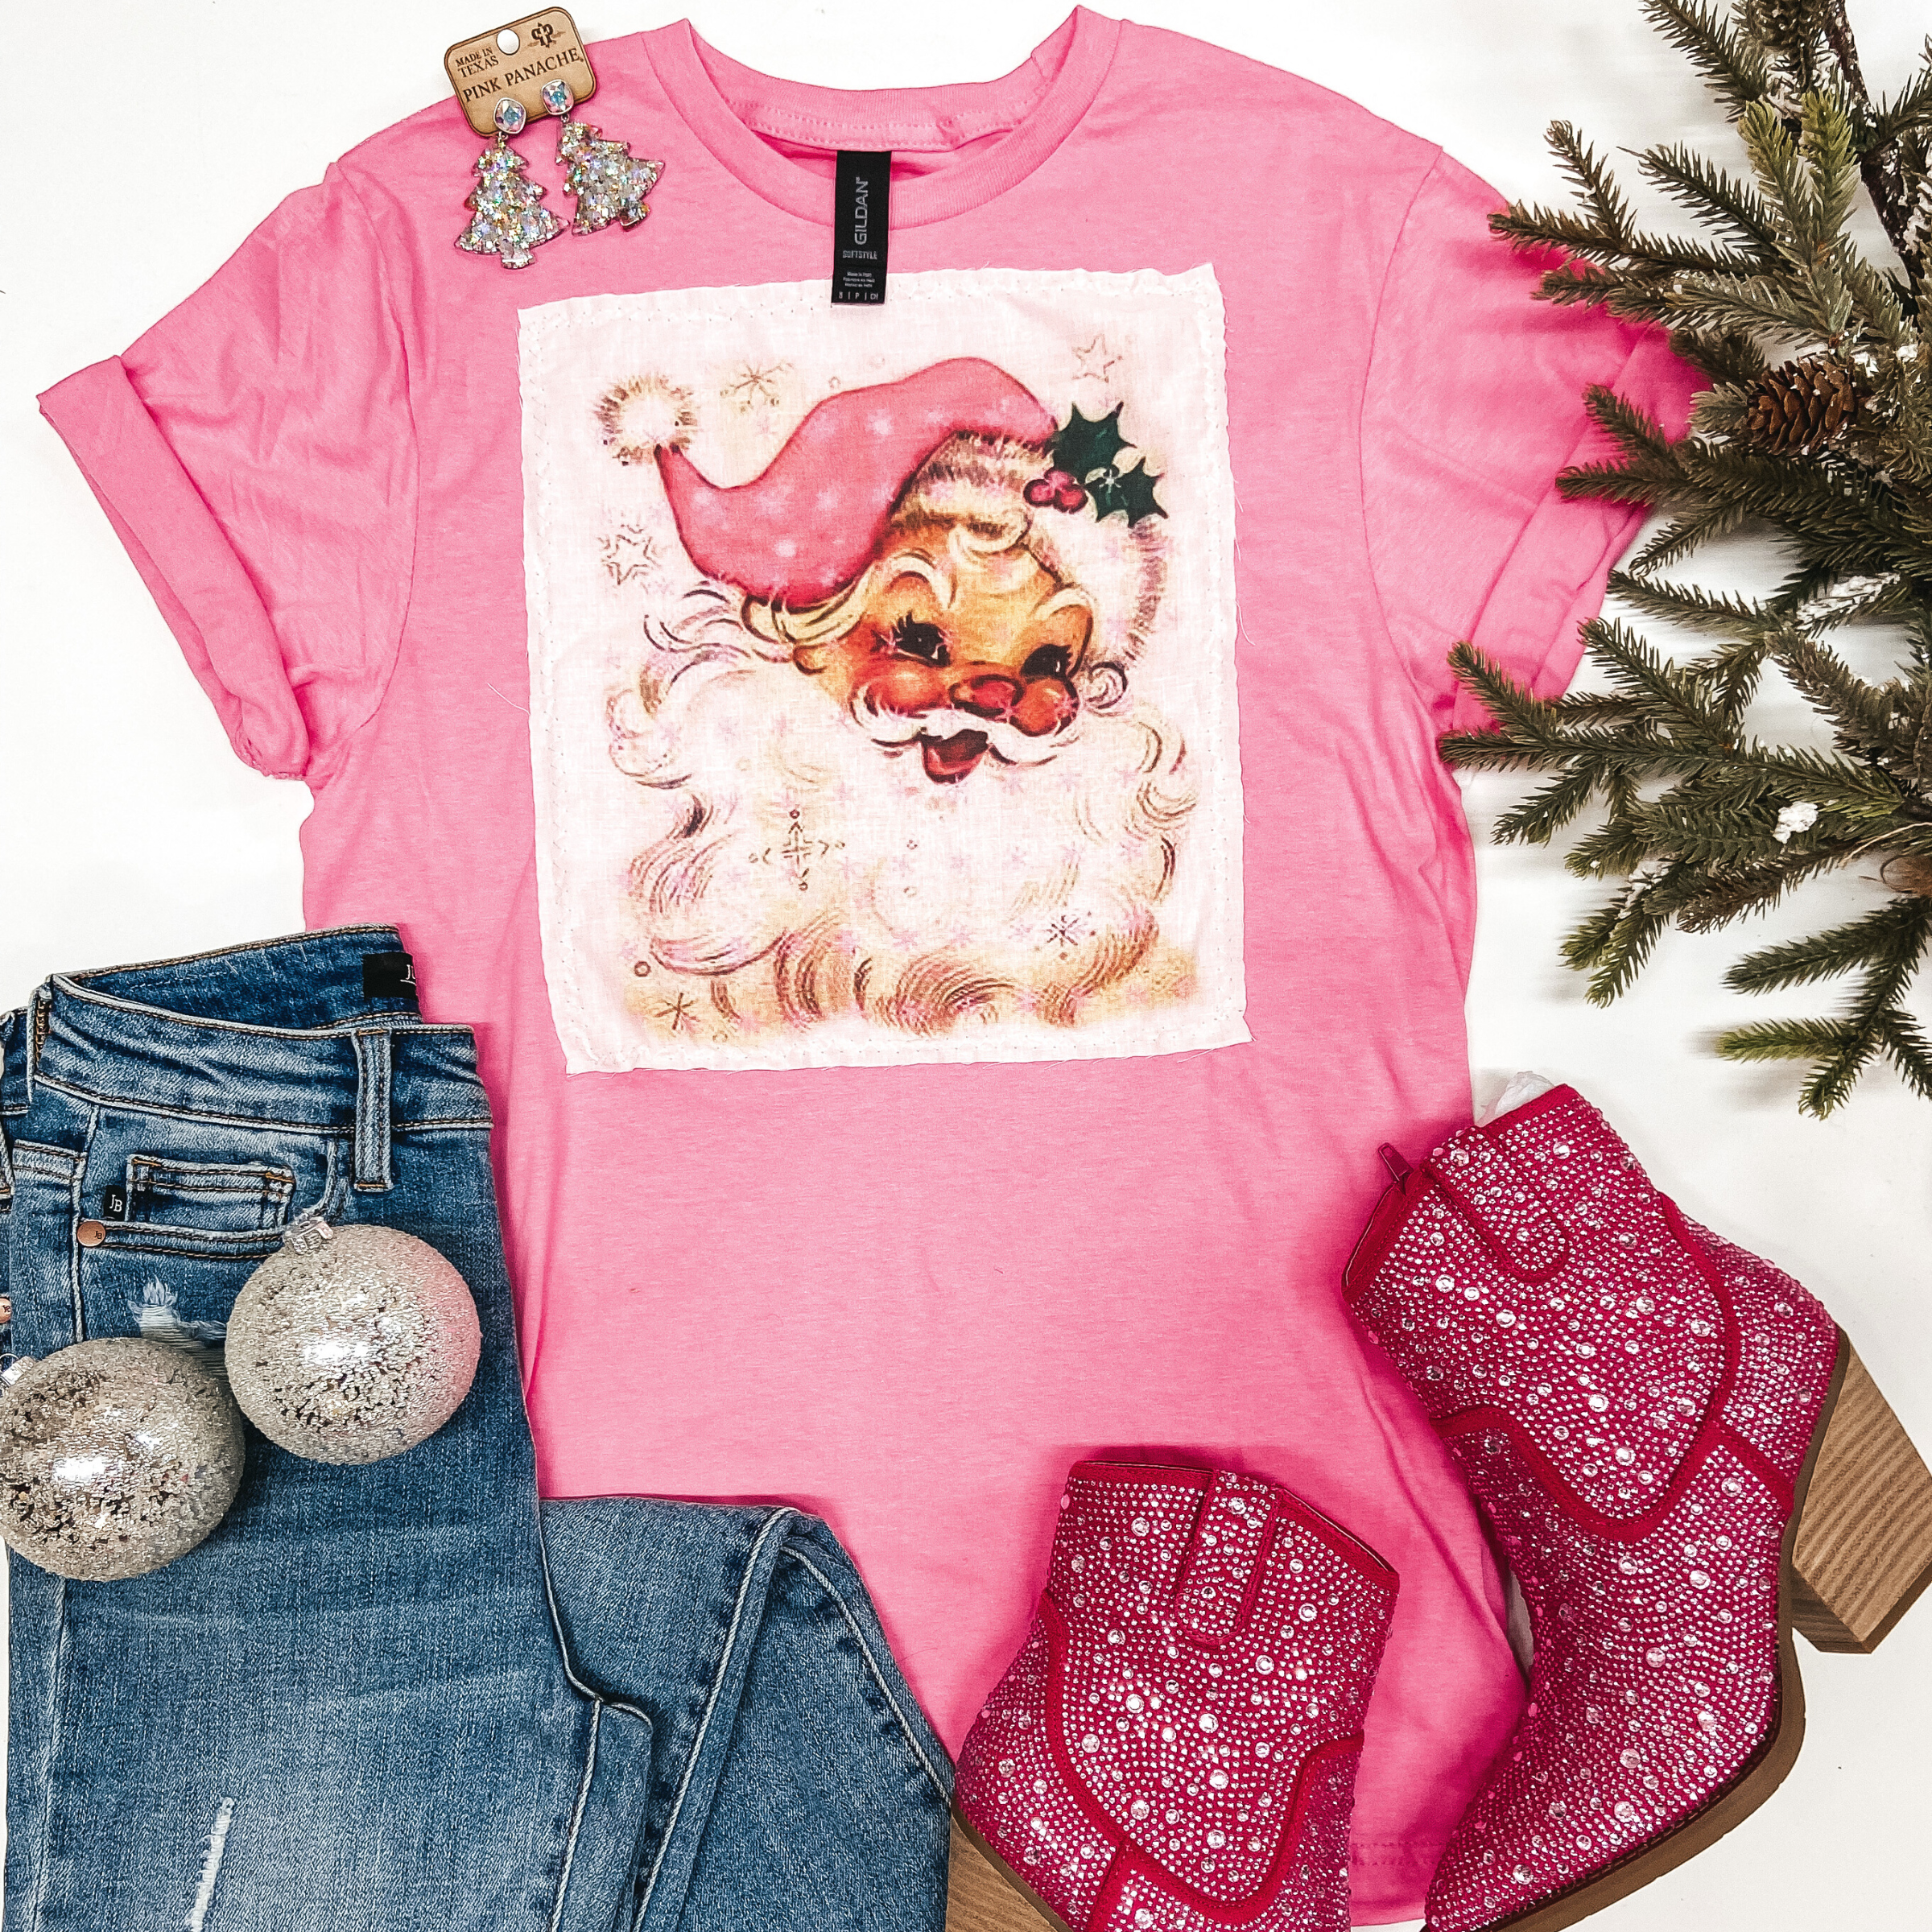 A pink short sleeve tee shirt with a white square patch sewn on the front with a vintage style image of Santa Clause. Pictured on a white background with garland, ornaments, silver earrings, pink booties, and a pair of folded jeans.